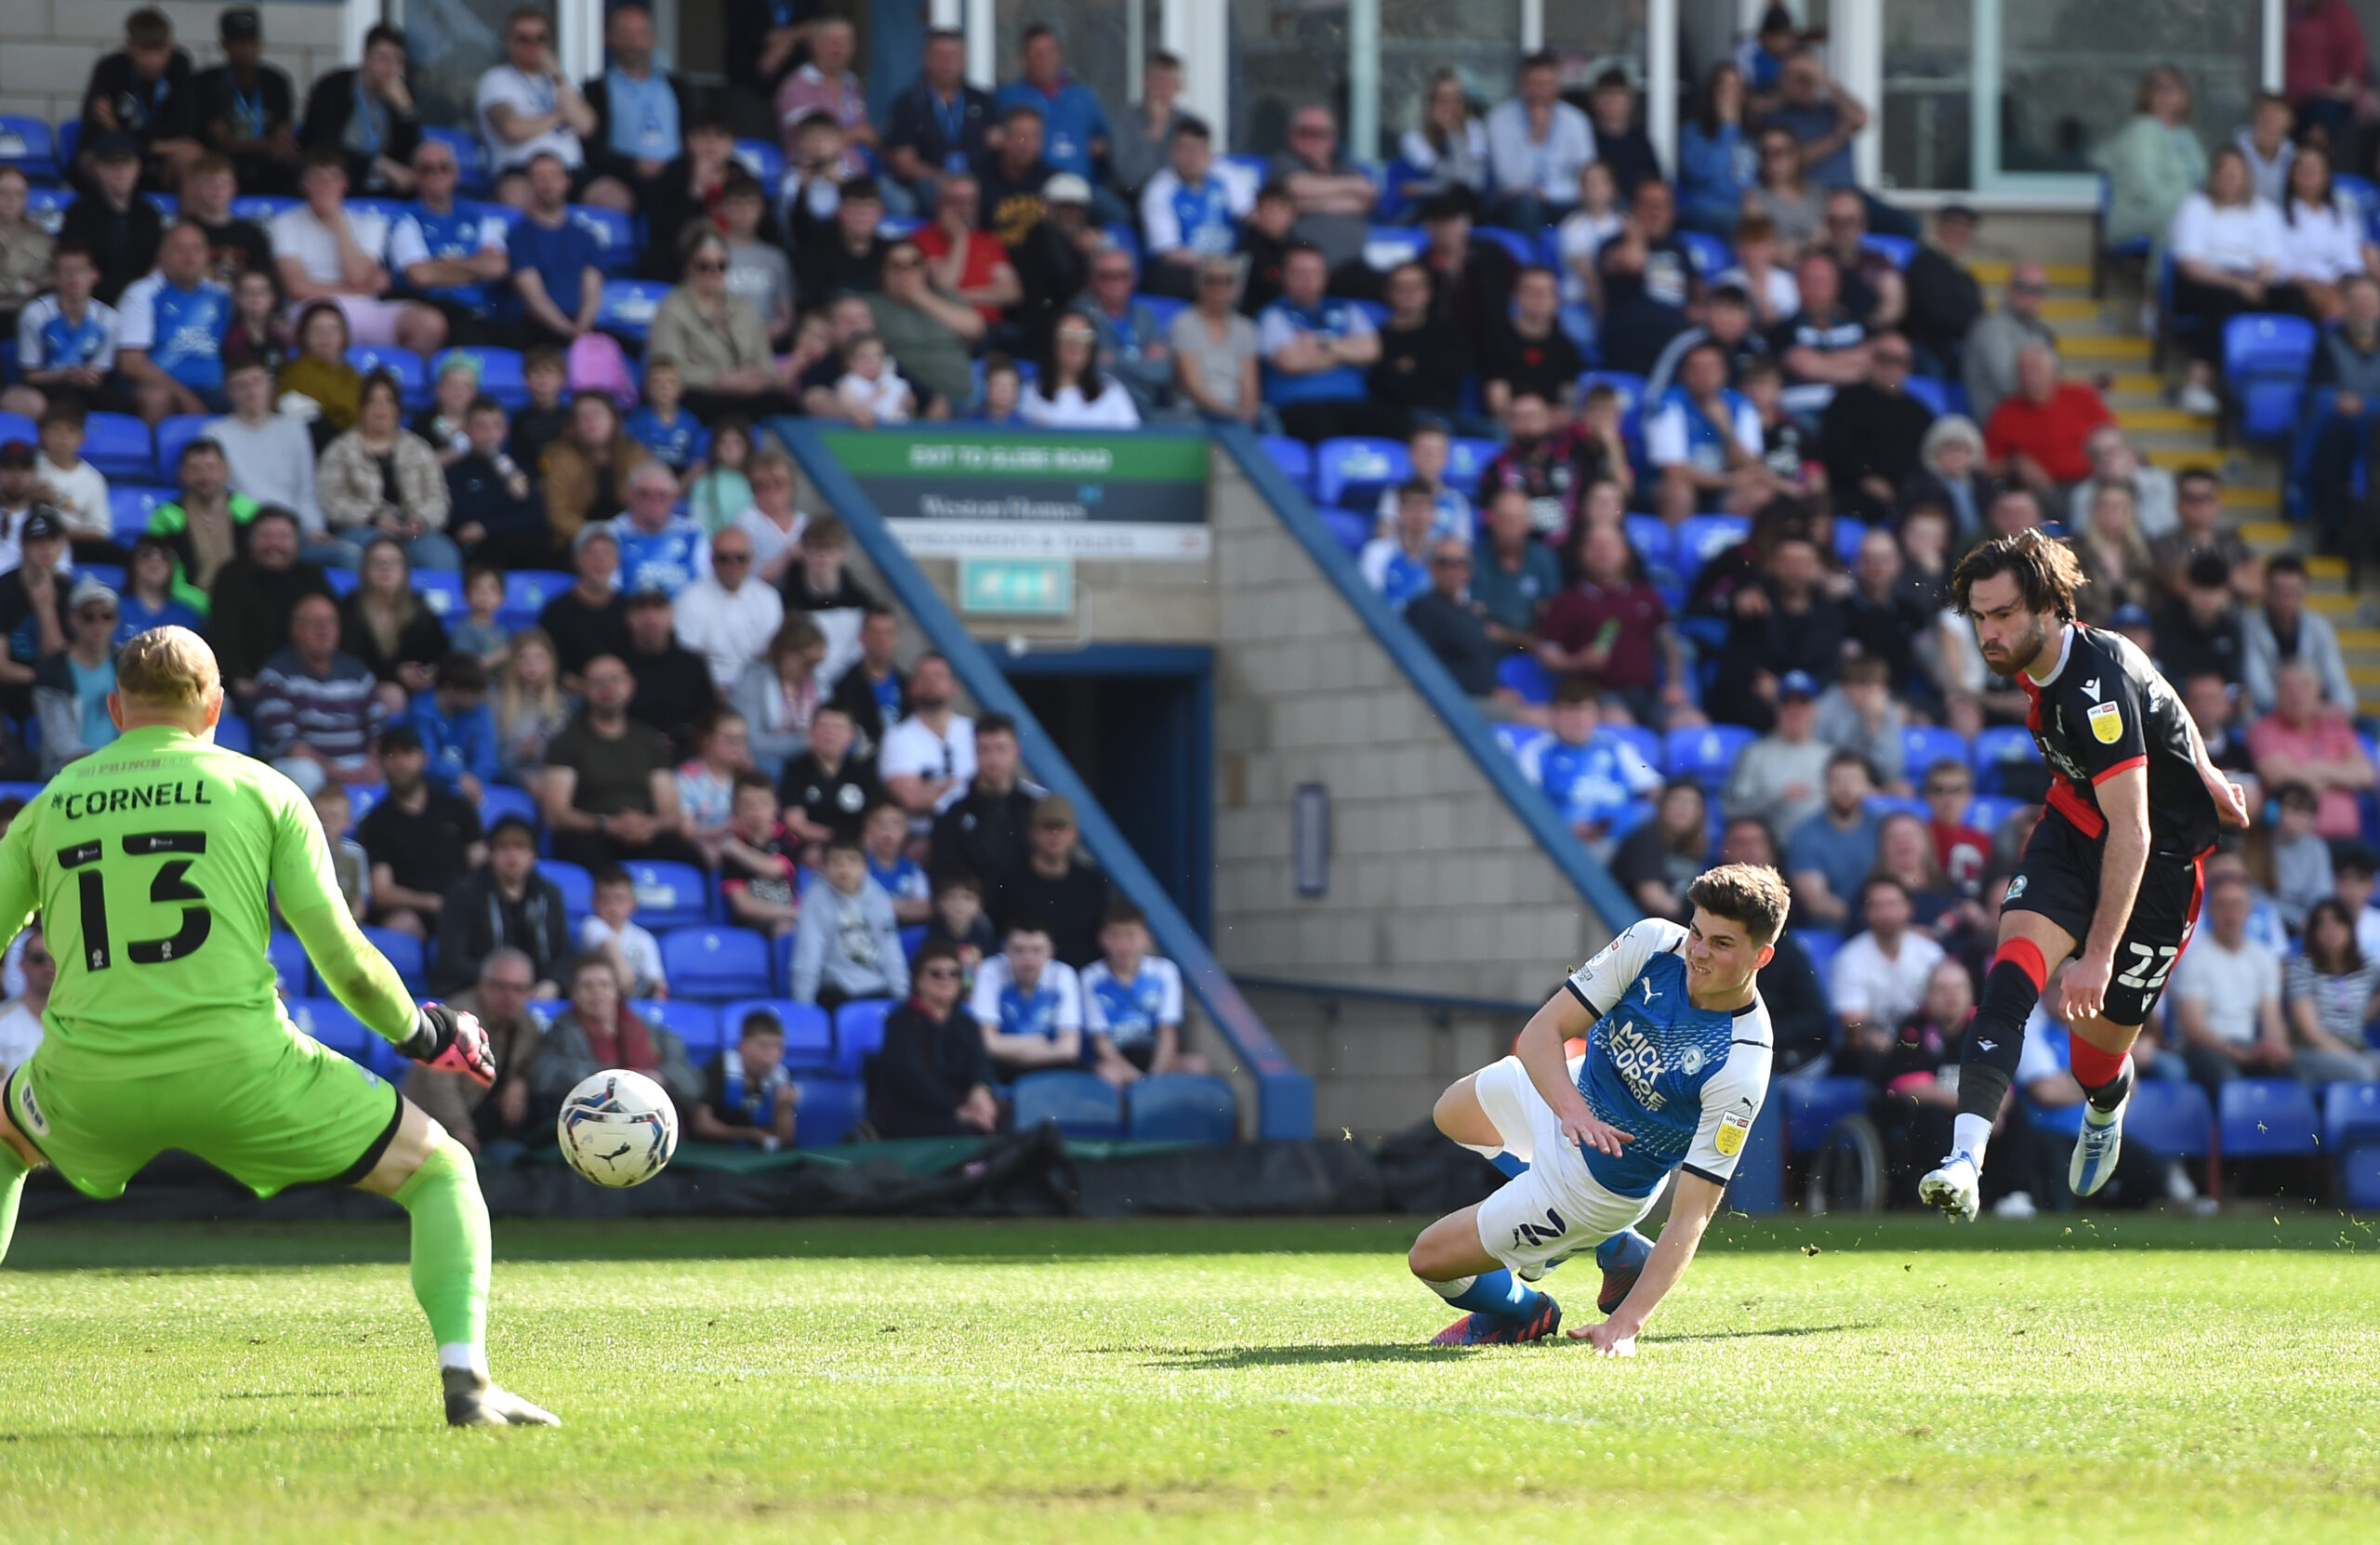 PETERBOROUGH, ENGLAND - APRIL 15: Ben Brereton of Blackburn Rovers scores their team's first goal during the Sky Bet Championship match between Peterborough United and Blackburn Rovers at London Road Stadium on April 15, 2022 in Peterborough, England. (Photo by Harriet Lander/Getty Images)